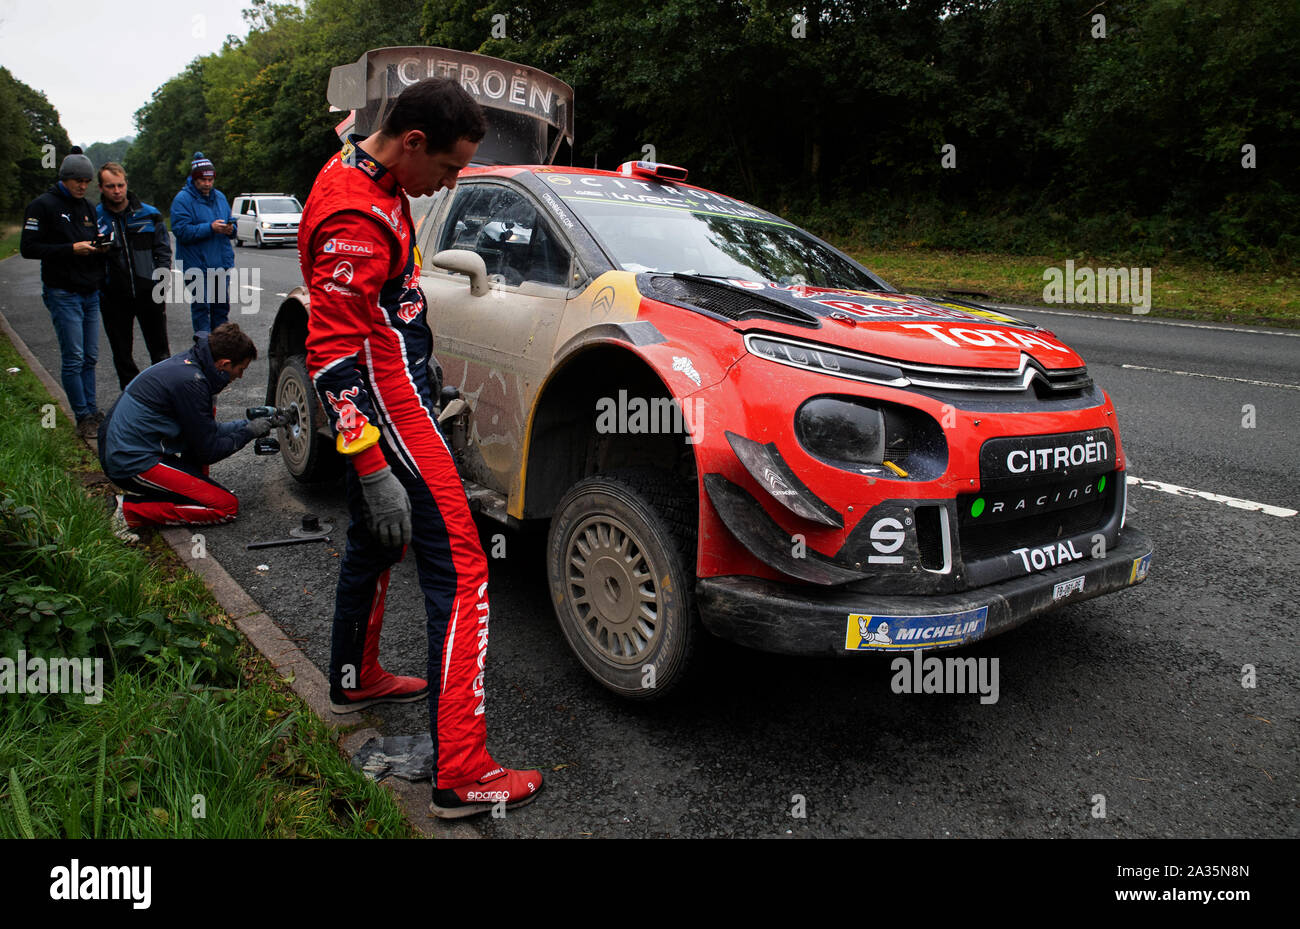 , Powys, Wales, UK. 05th Oct 2019. Wales Rally GB 2019, Seb Ogier and Juien Ingrassia, tyre change on the A470 at Llanidloes, Newtown, Powys, Wales, Alamy Lives News/Bob Sharples Credit: Bob Sharples/Alamy Live News Stock Photo